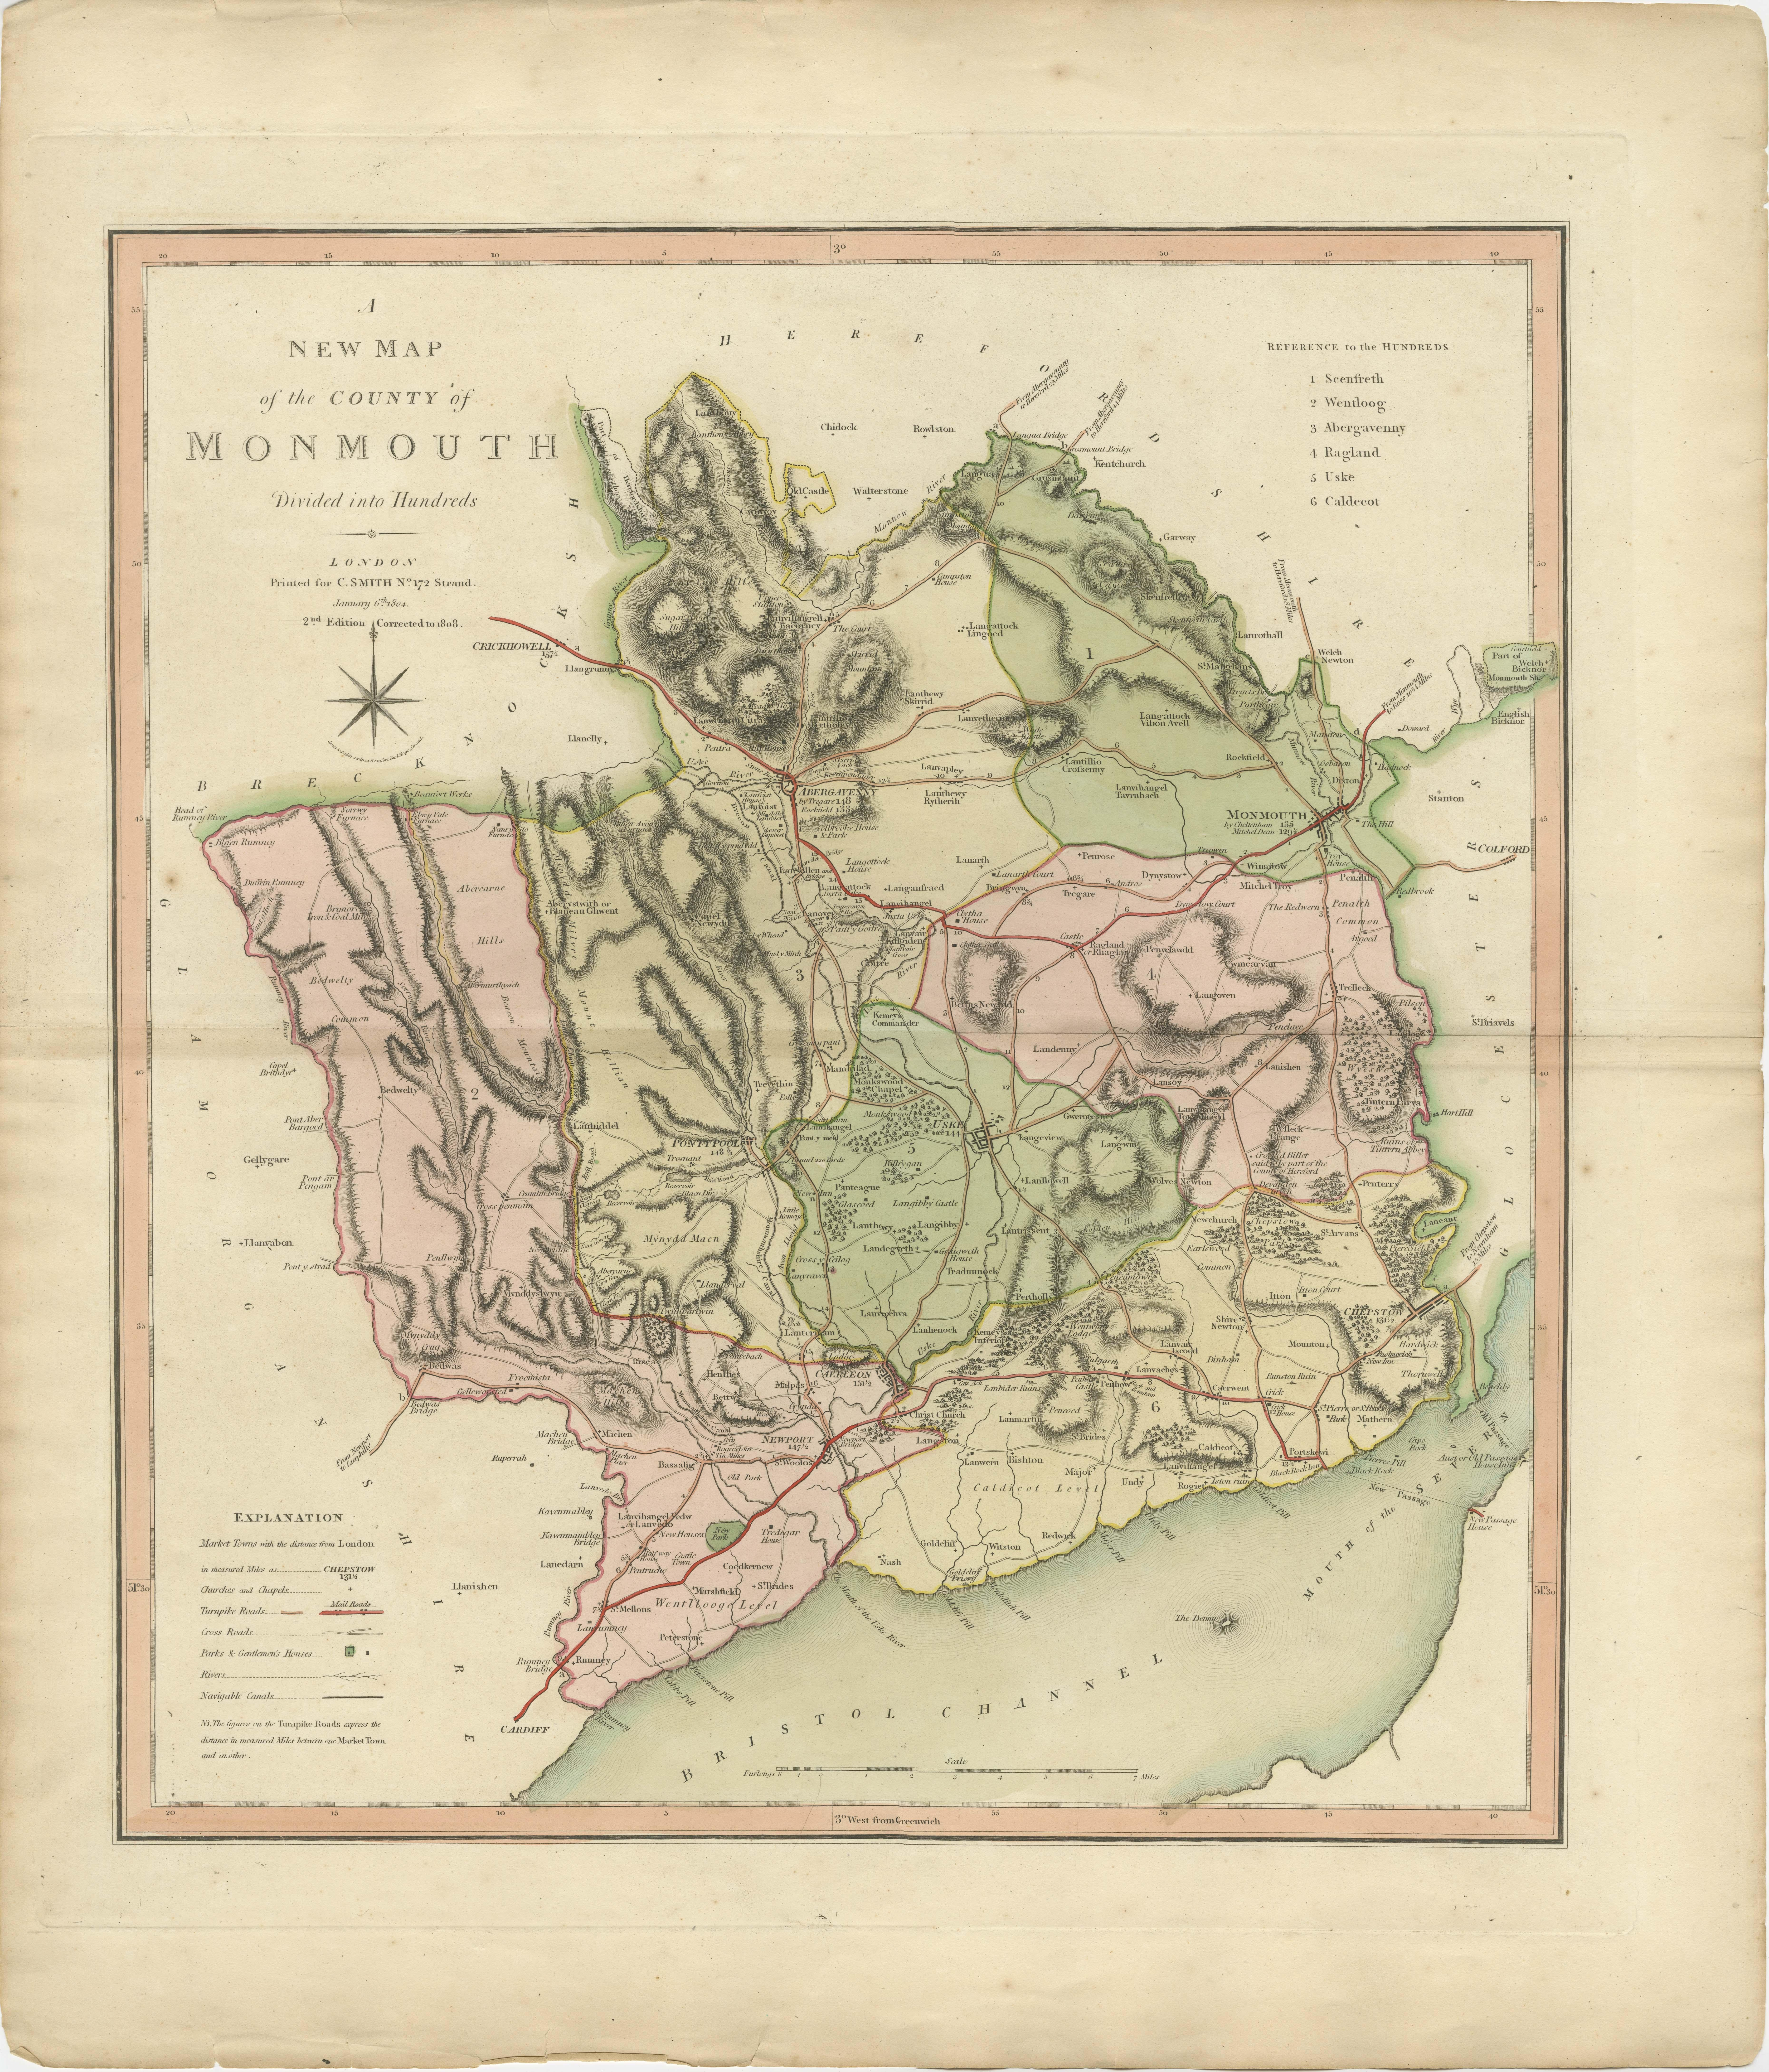 Antique county map of Monmouthshire first published circa 1800. Villages, towns, and cities illustrated include Newport, Chepstow, Rockfield, and Pontypool.

Charles Smith was a cartographer working in London from circa 1800. His maps were finely